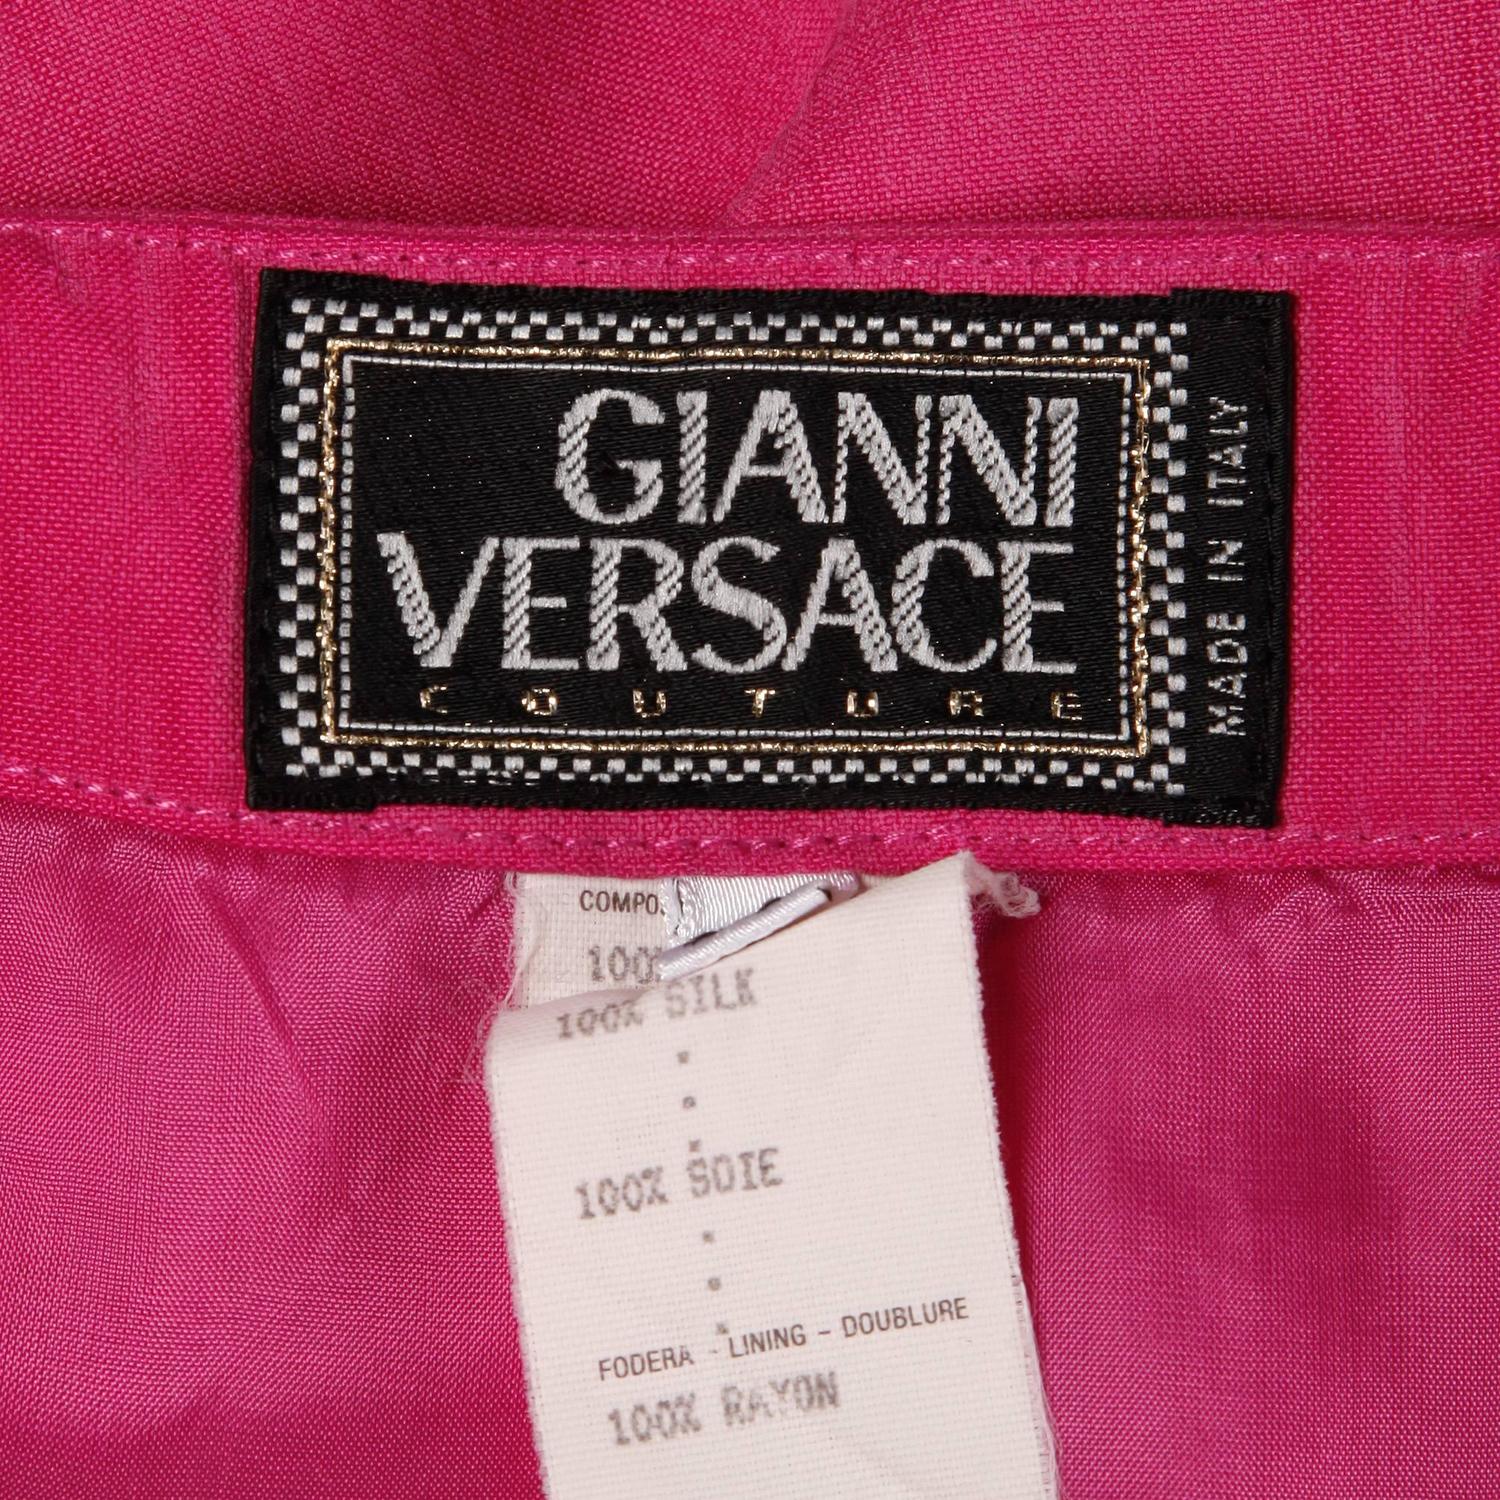 Gianni Versace Couture 1990s Vintage Pink Silk Skirt with Medusa ...